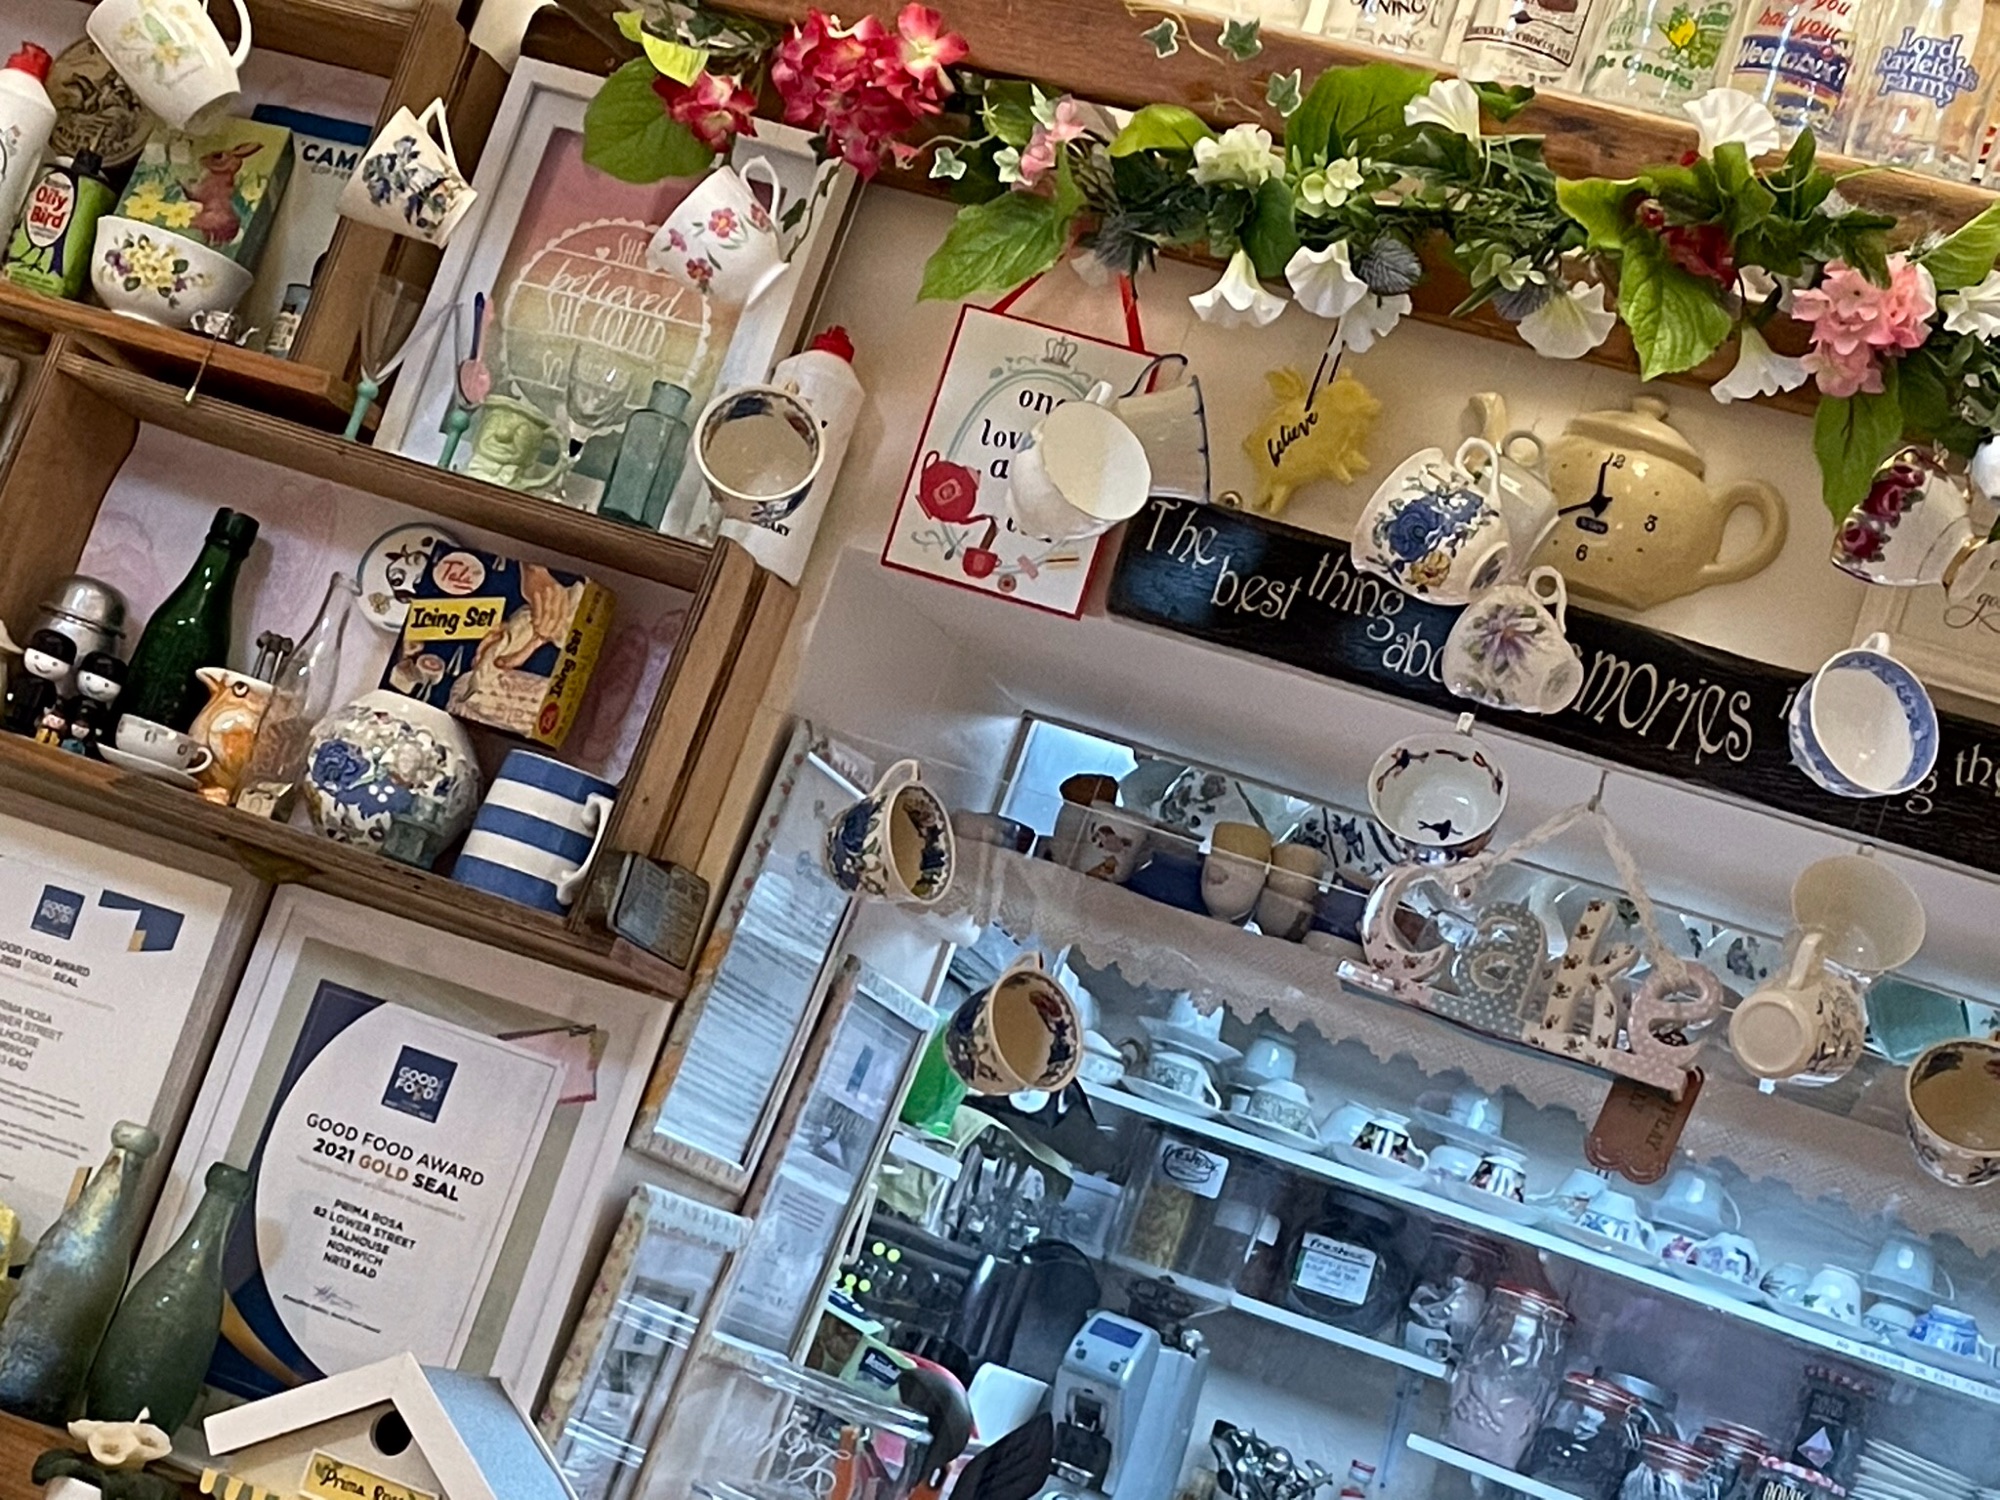 The view inside Prima Rosa Tea Rooms & Crafts at Salhouse near Norwich in Norfolk